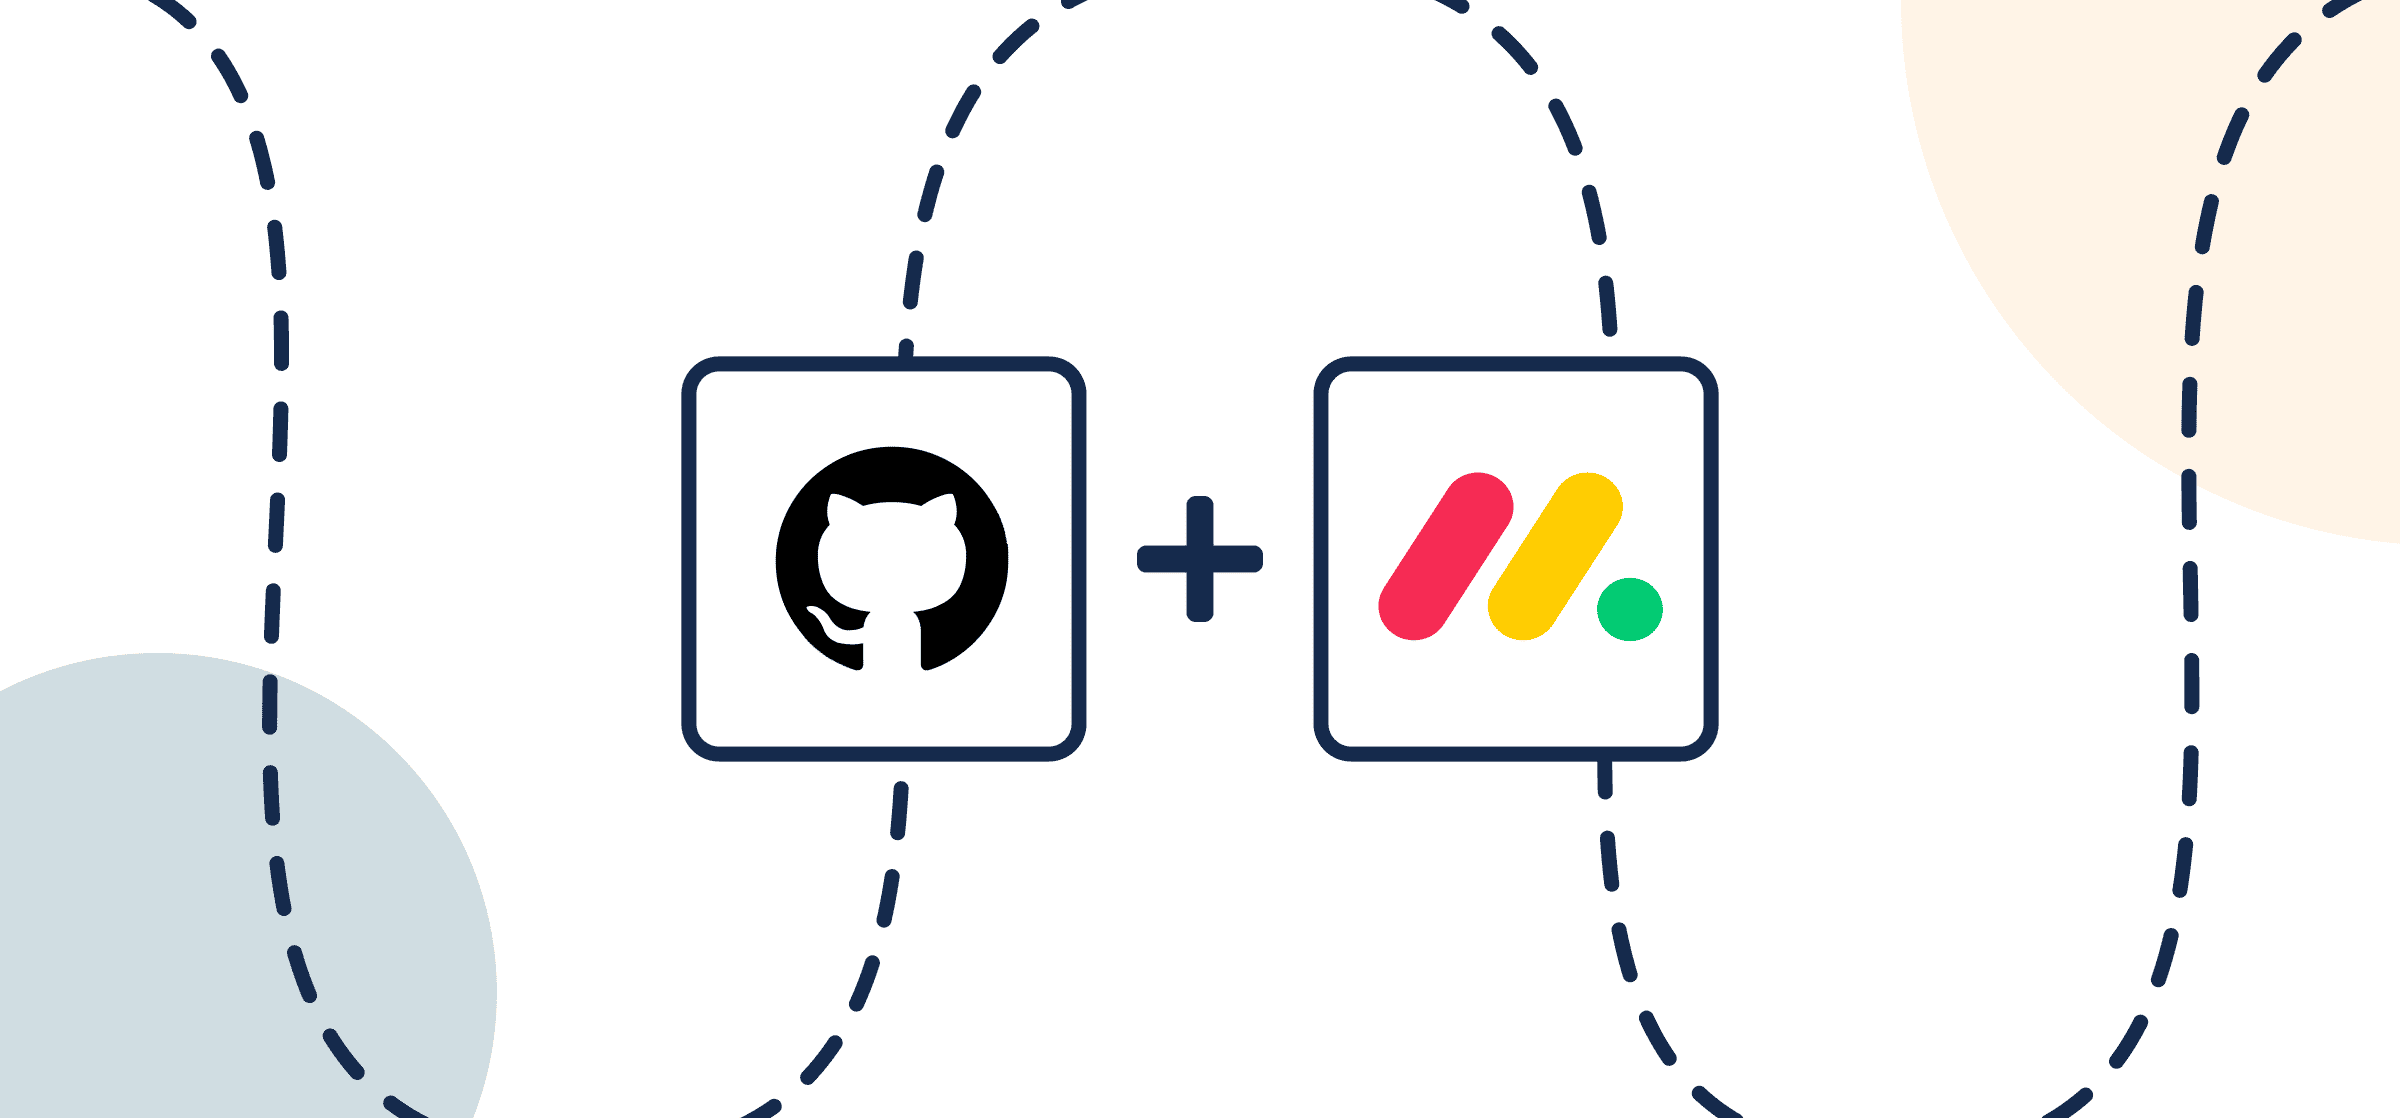 Featured image with Logos for monday.com and GitHub, representing Unito's guide to syncing GitHub Issues to monday.com tasks with a 2-way integration.